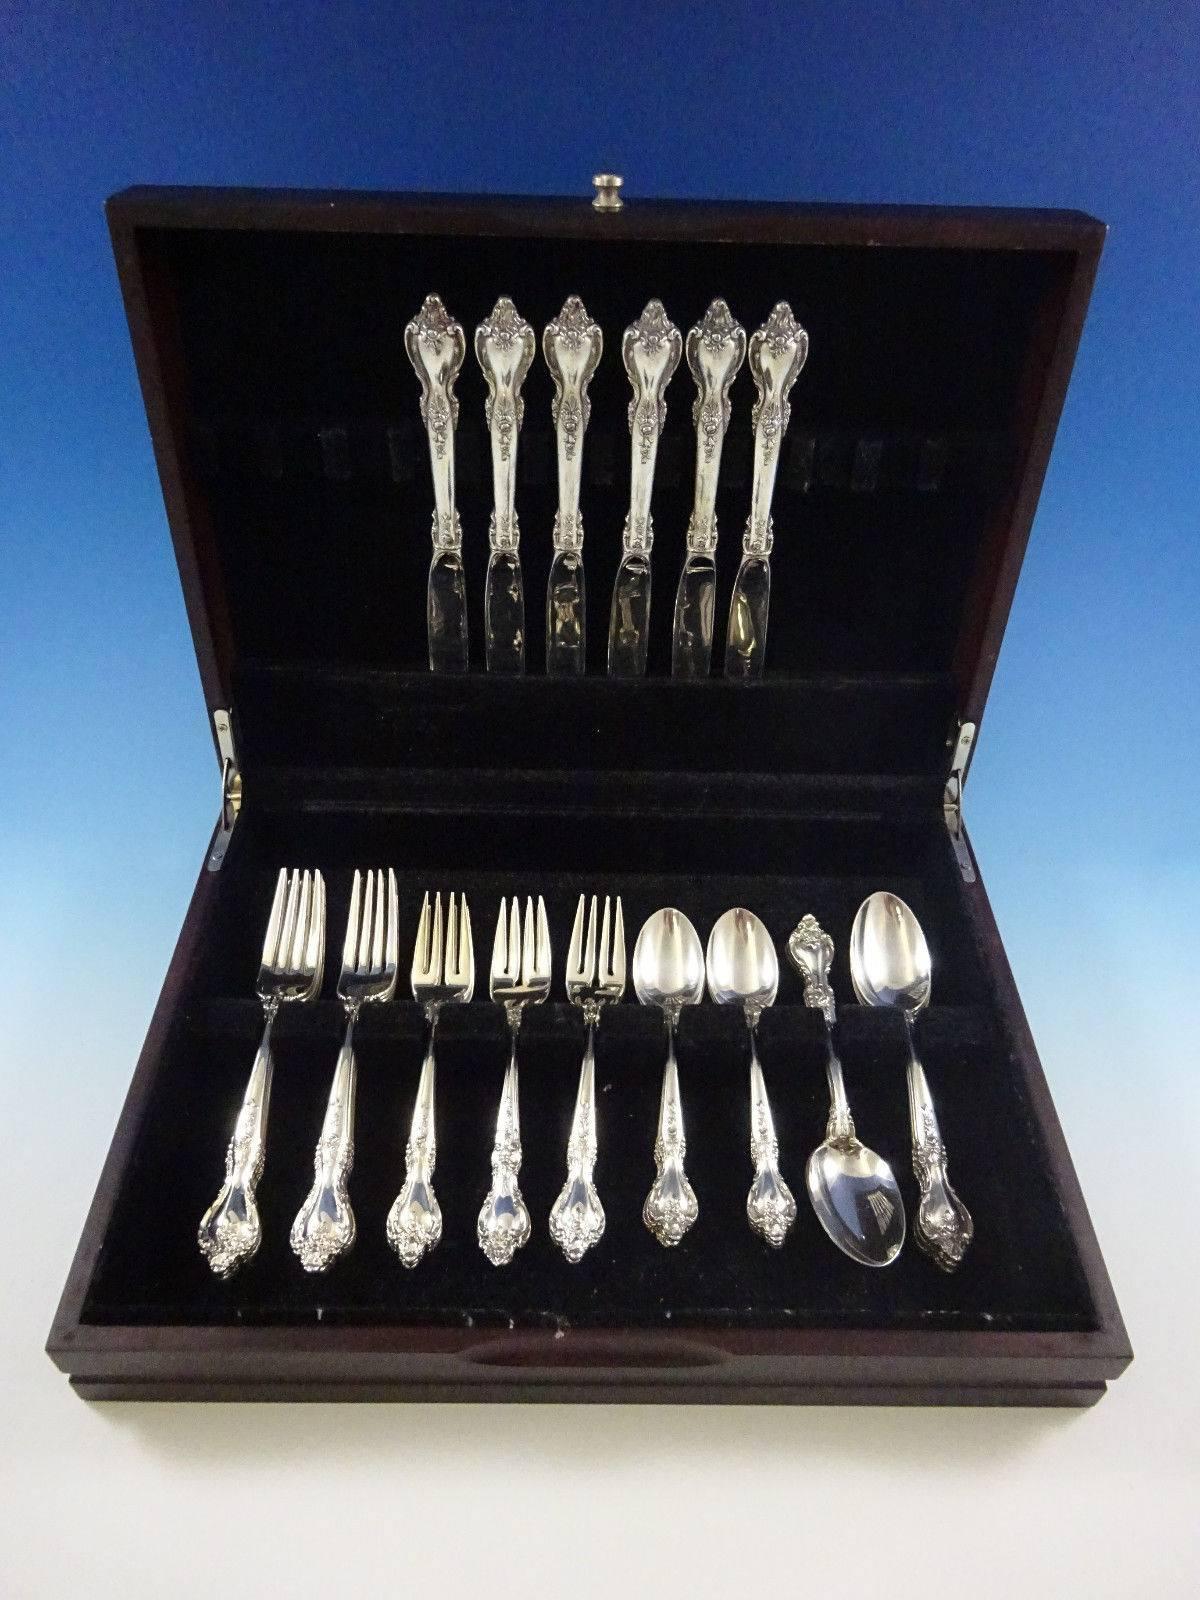 Delacourt by Lunt sterling silver flatware set, 30 pieces. Great starter set! This set includes: Six knives, 8 7/8